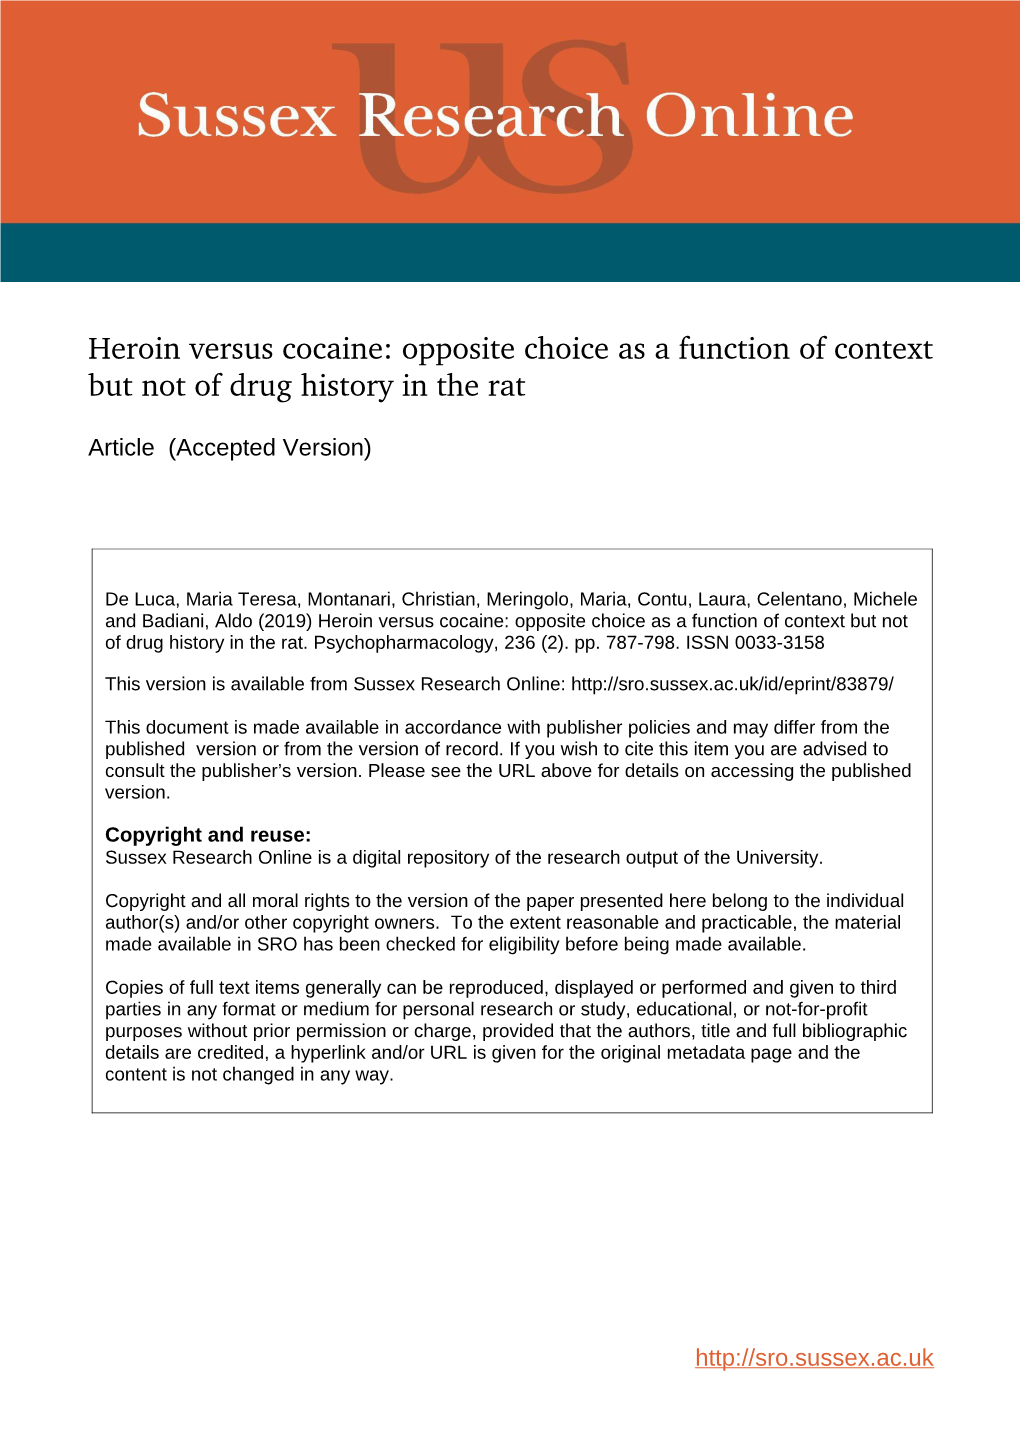 Heroin Versus Cocaine: Opposite Choice As a Function of Context but Not of Drug History in the Rat